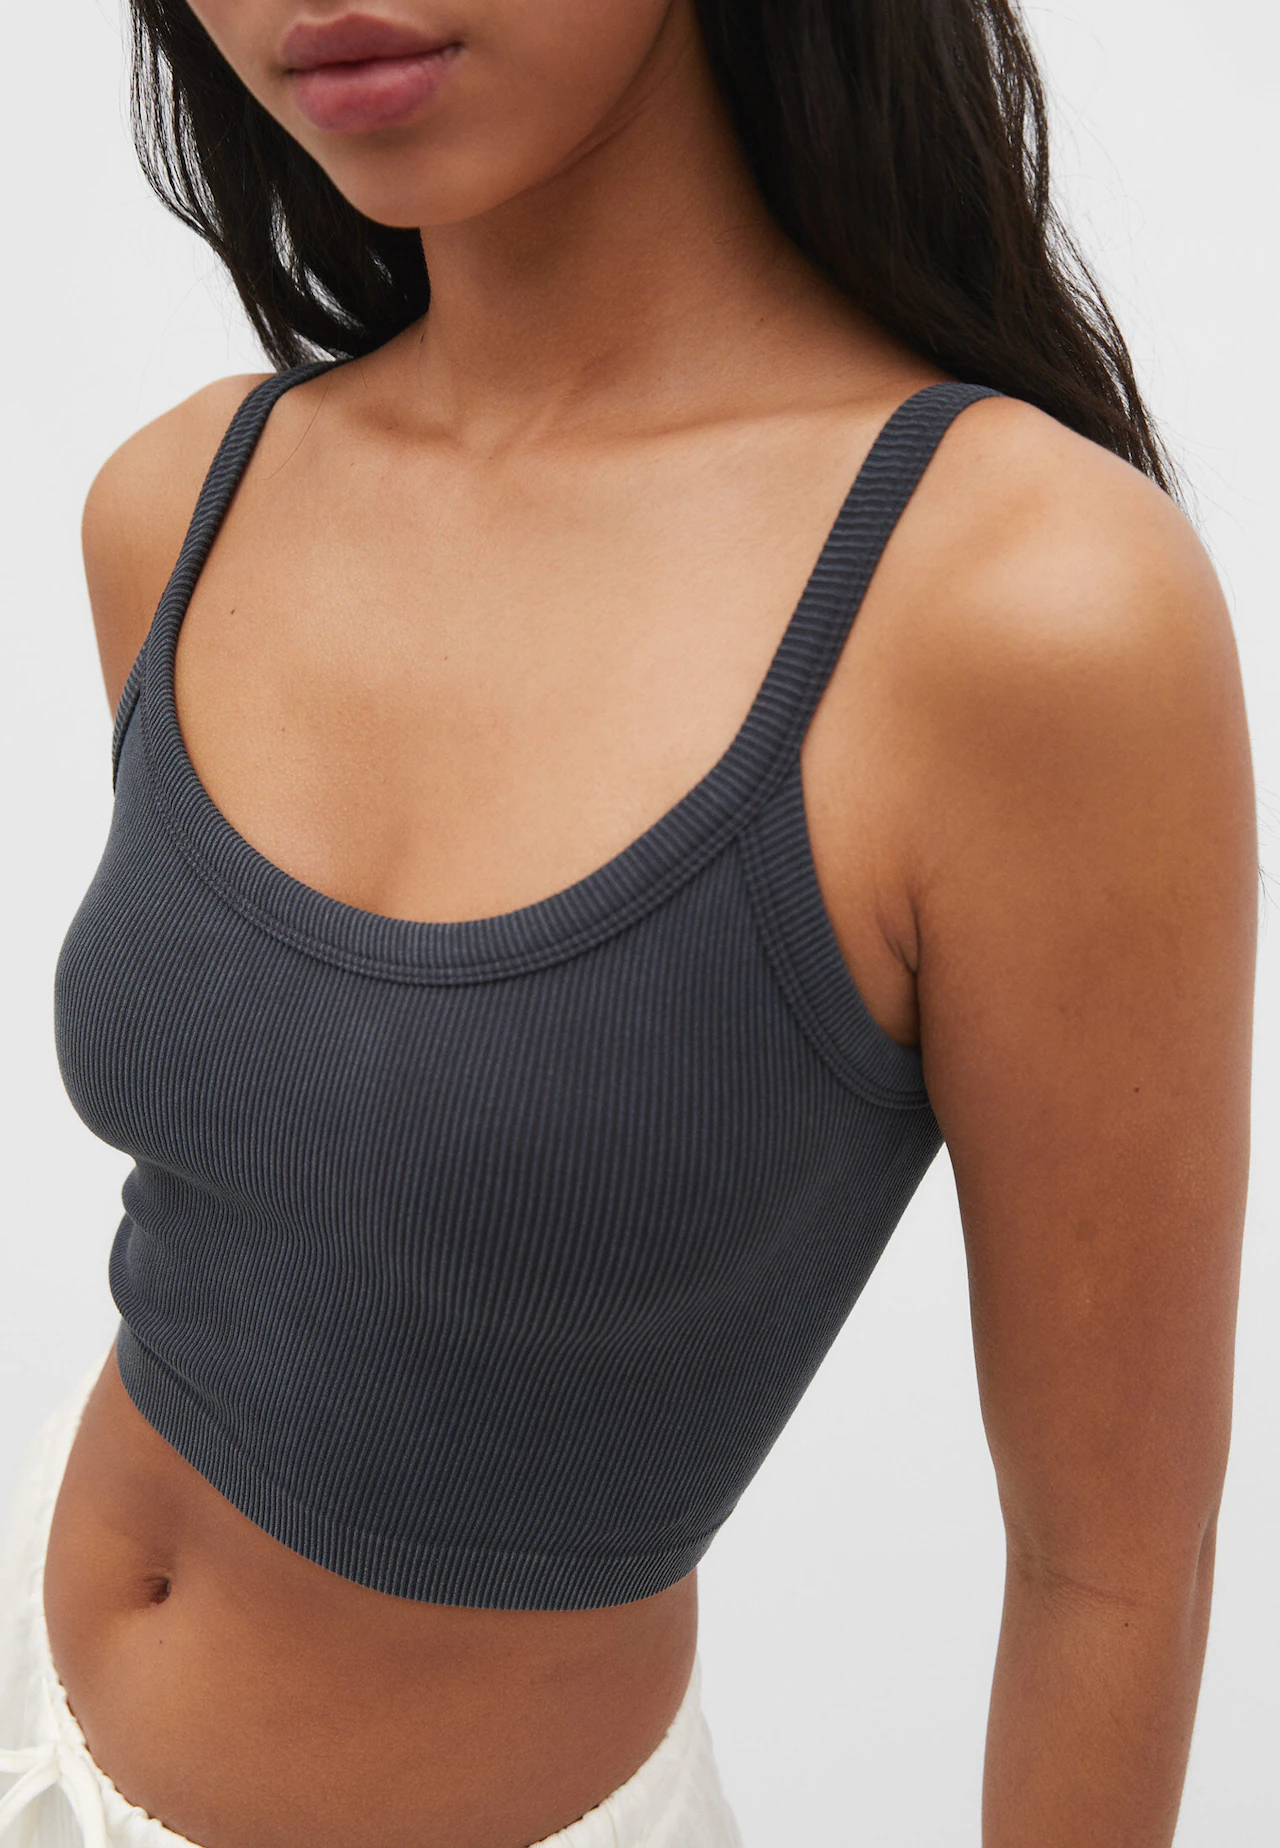 Crop top camisole with straps